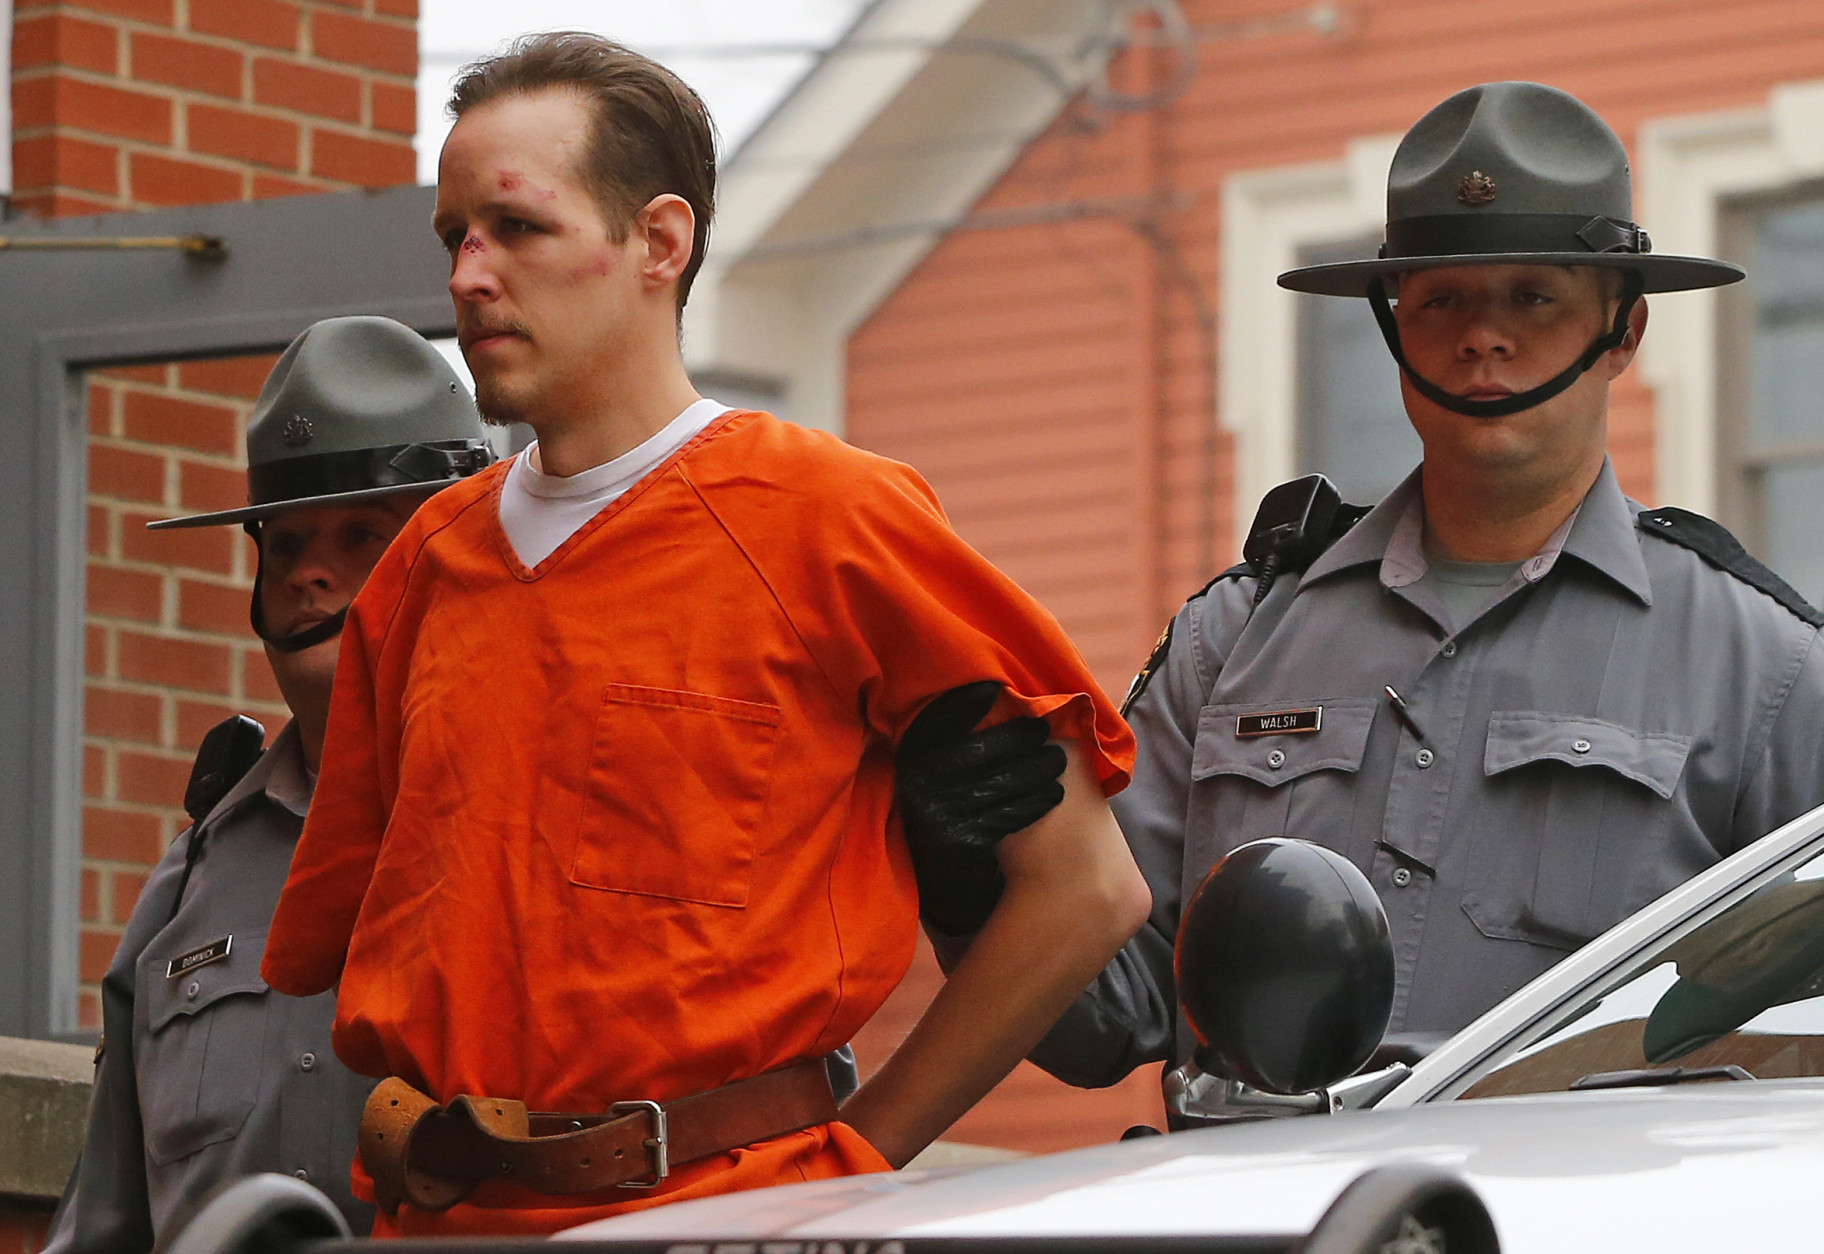 FOR USE AS DESIRED, YEAR END PHOTOS - FILE - Eric Frein is escorted by police into the Pike County Courthouse for his arraignment in Milford, Pa., Friday Oct. 31, 2014. Frein was captured seven weeks after police say he killed a Pennsylvania State trooper in an ambush outside a barracks in northeastern Pennsylvania. (AP Photo/Rich Schultz, File)